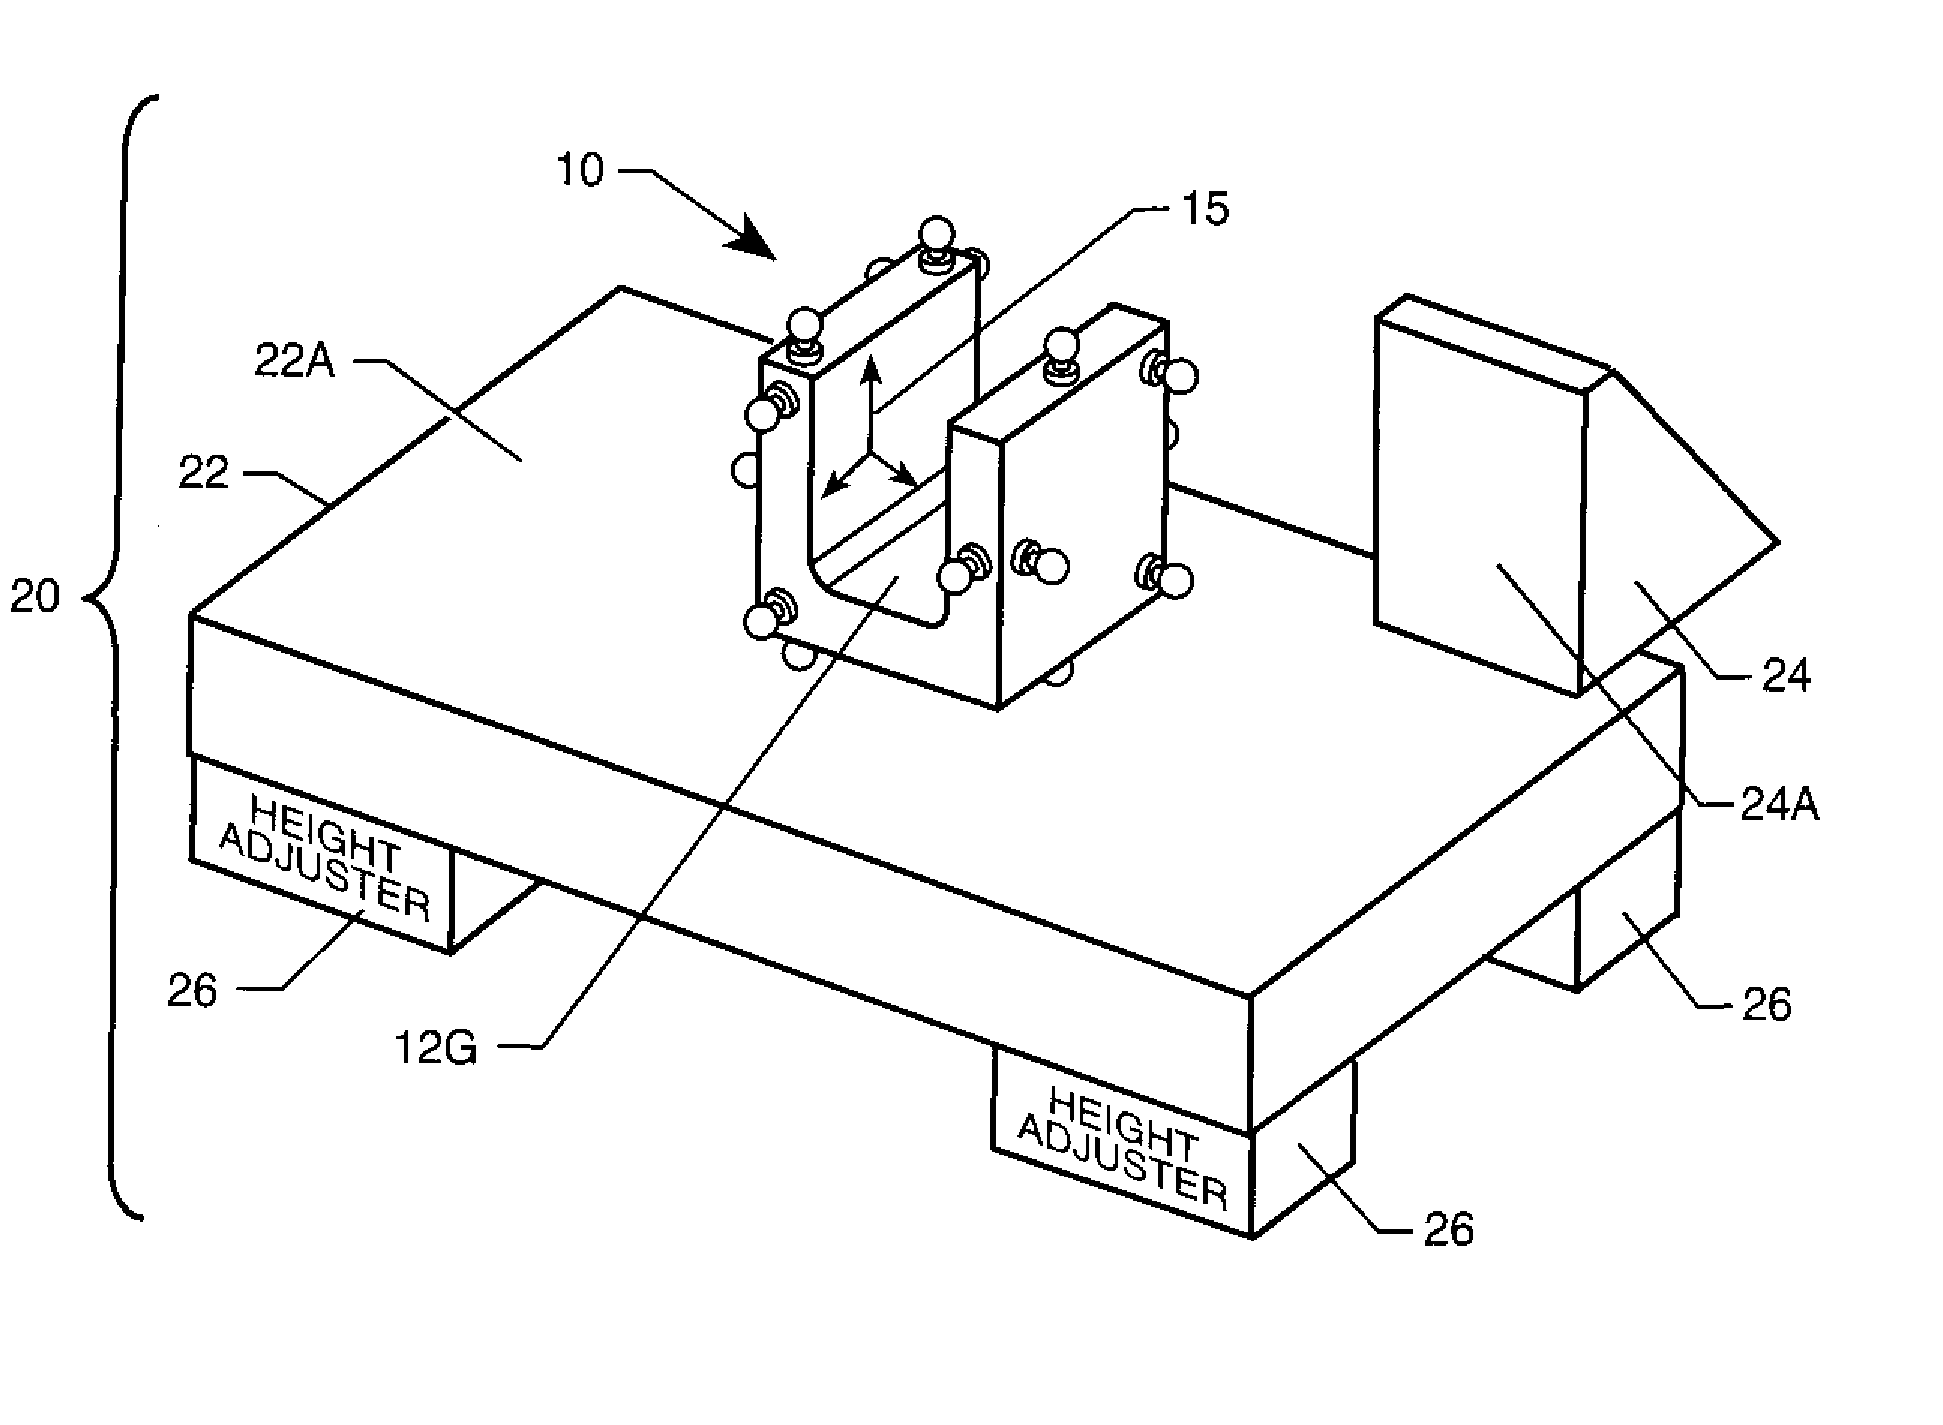 Positioning System For Single Or Multi-Axis Sensitive Instrument Calibration And Calibration System For Use Therewith